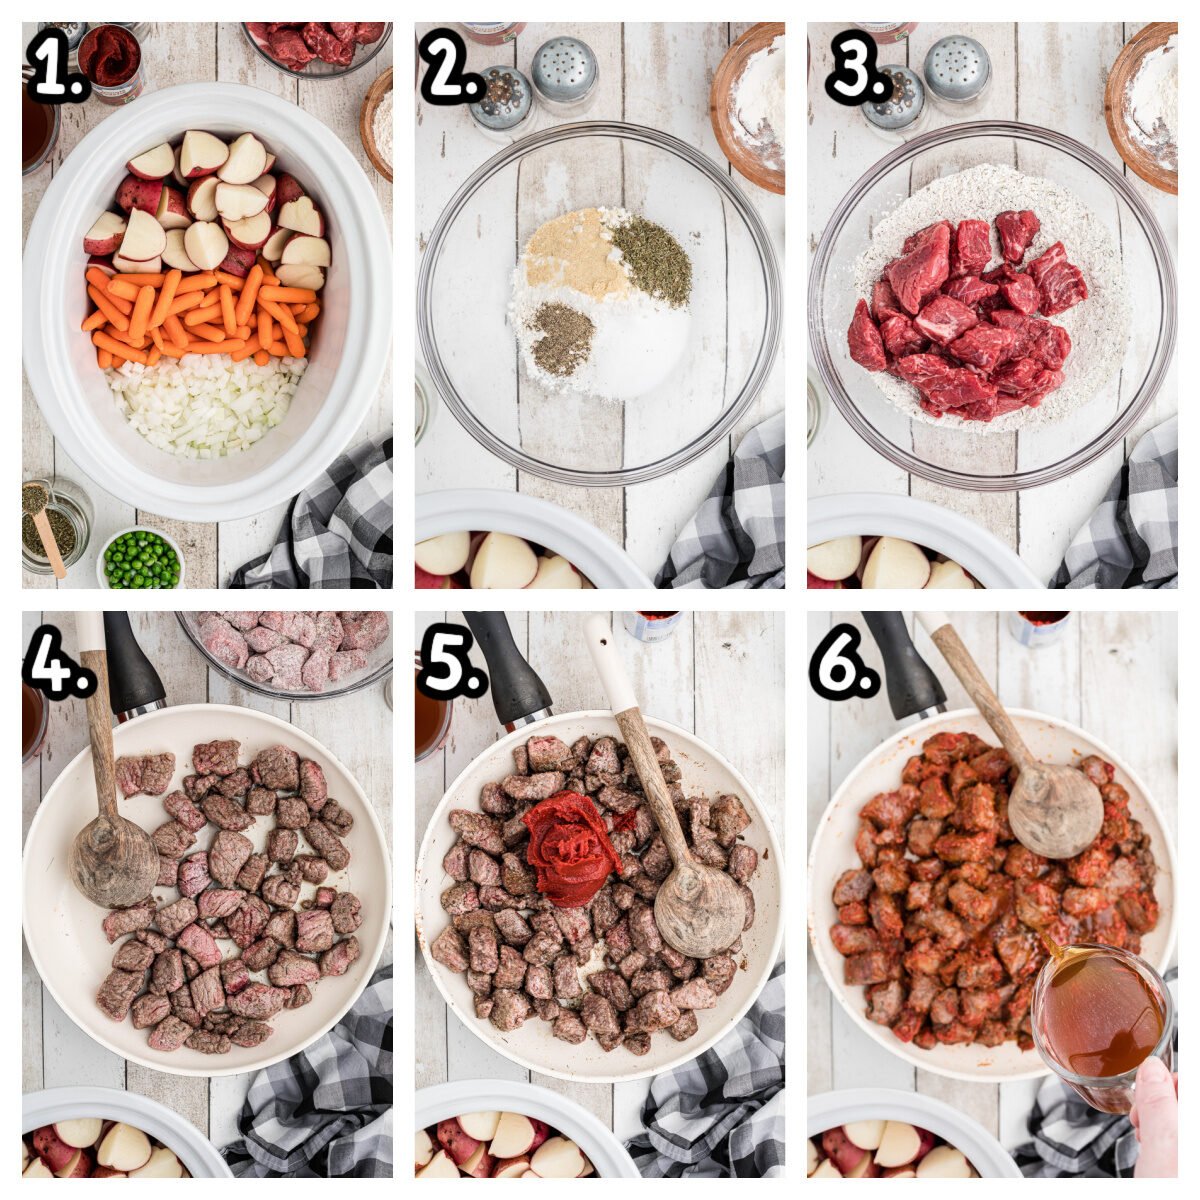 6 images showing how to start assembling beef stew.